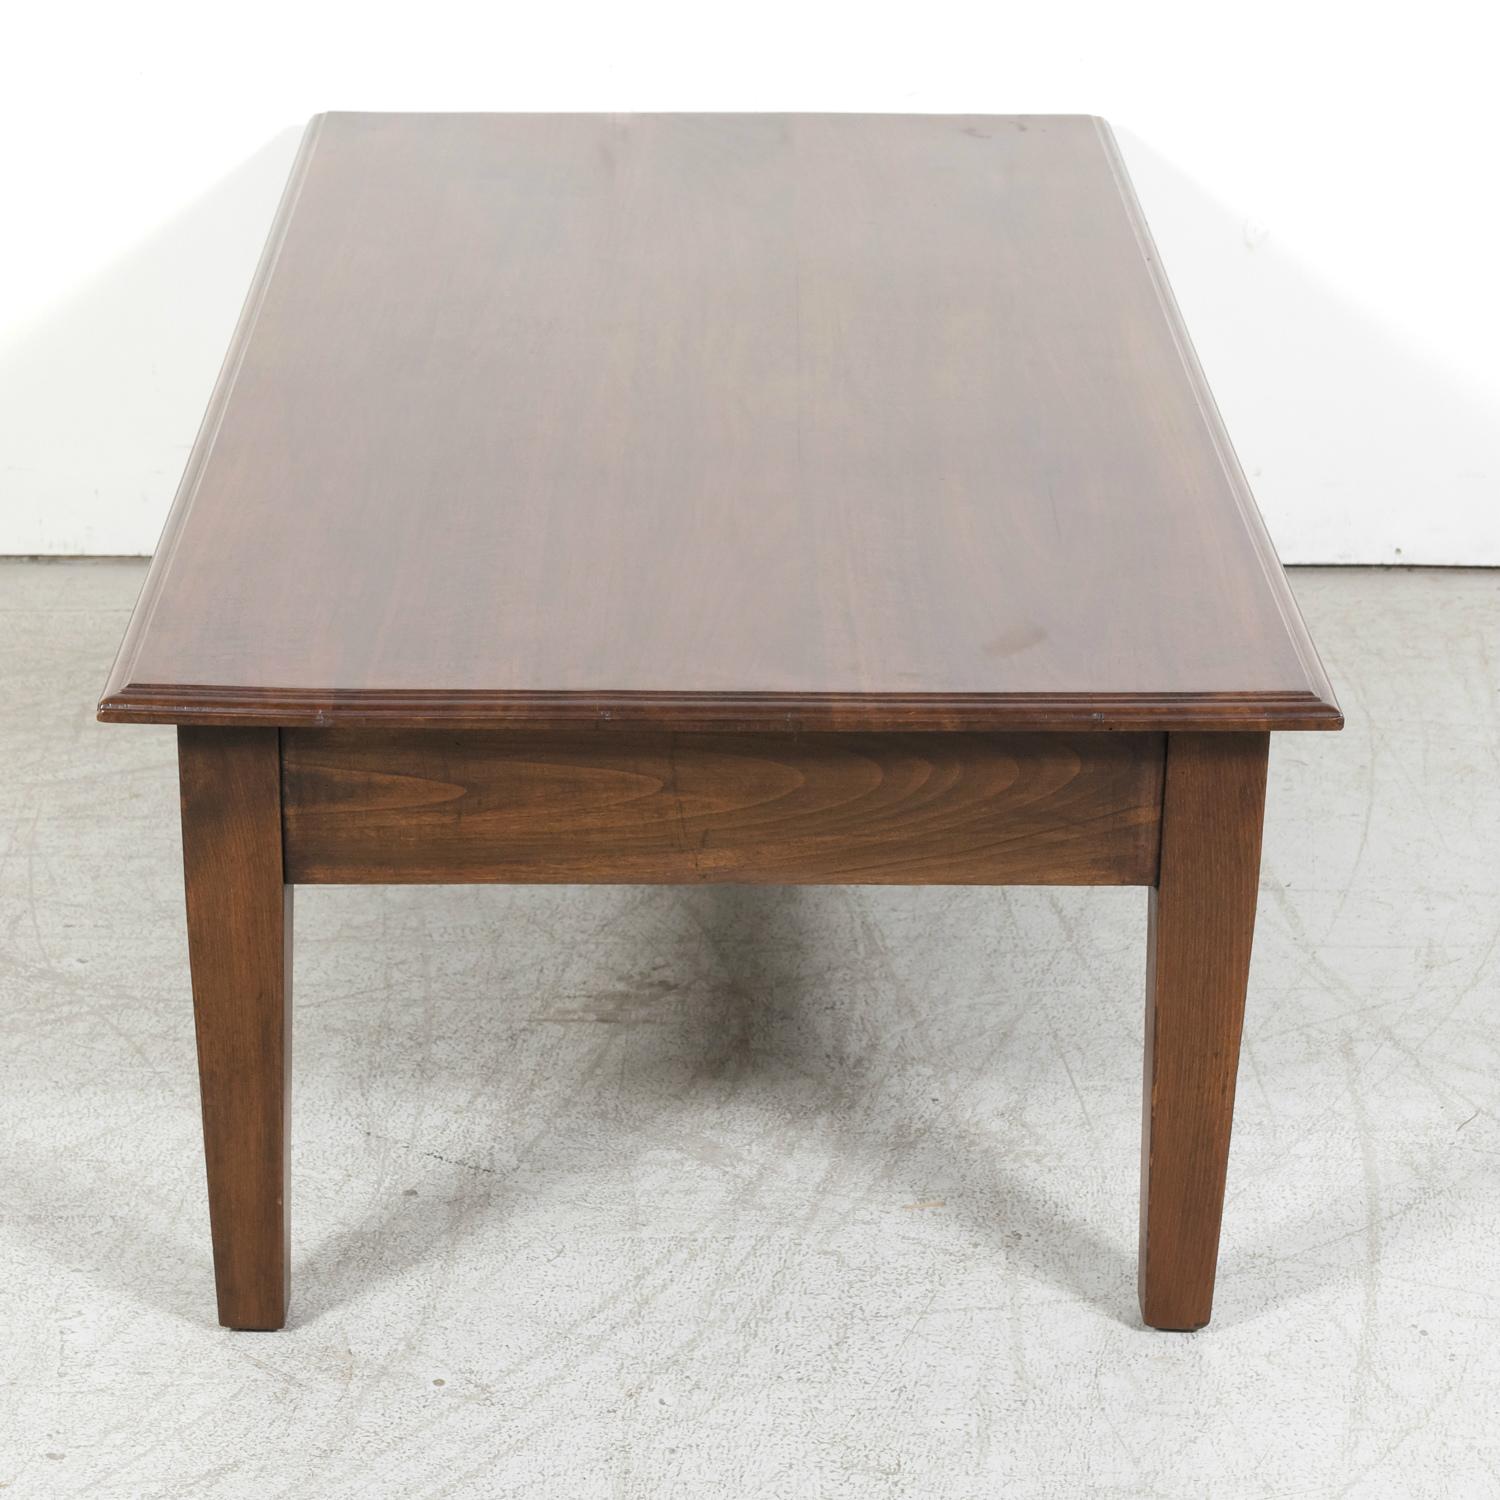 Large 19th Century Rustic French Country Solid Walnut Coffee Table with Drawer For Sale 13